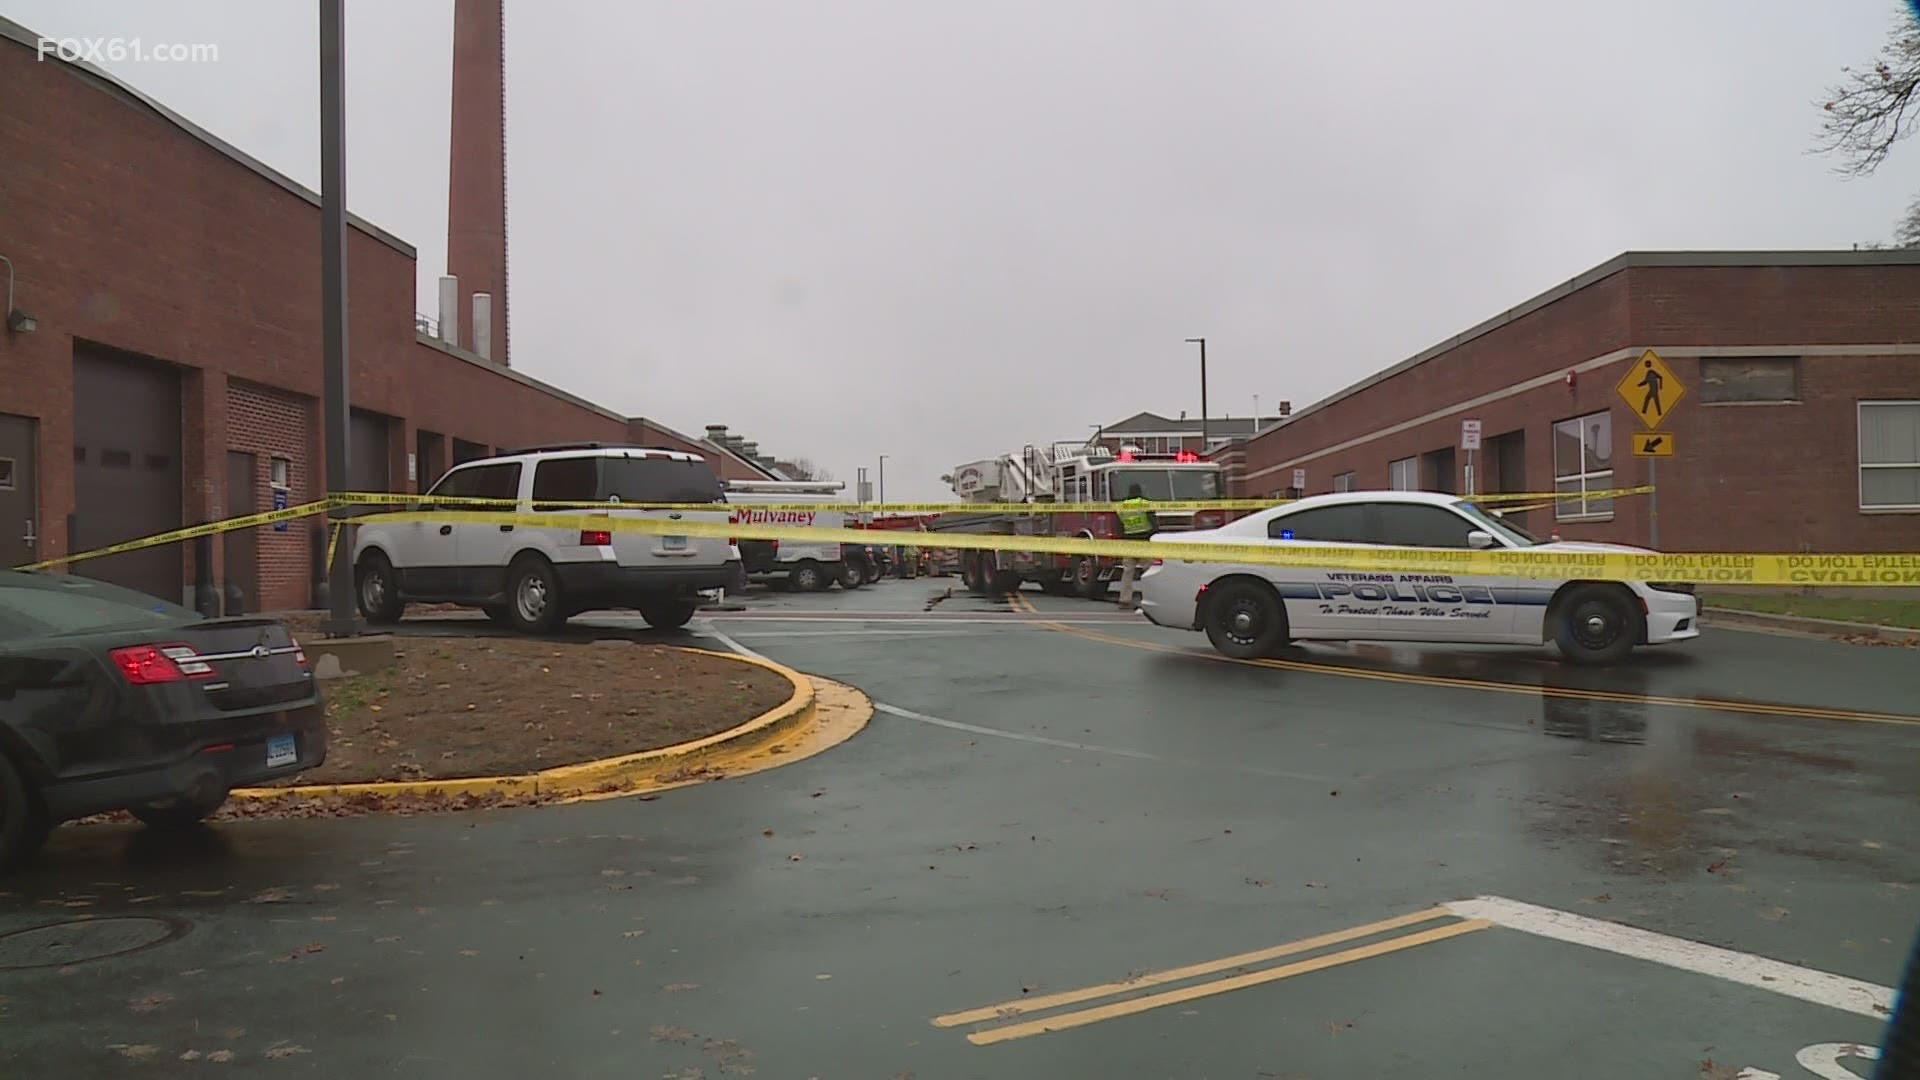 A VA employee and a contractor were reportedly killed.